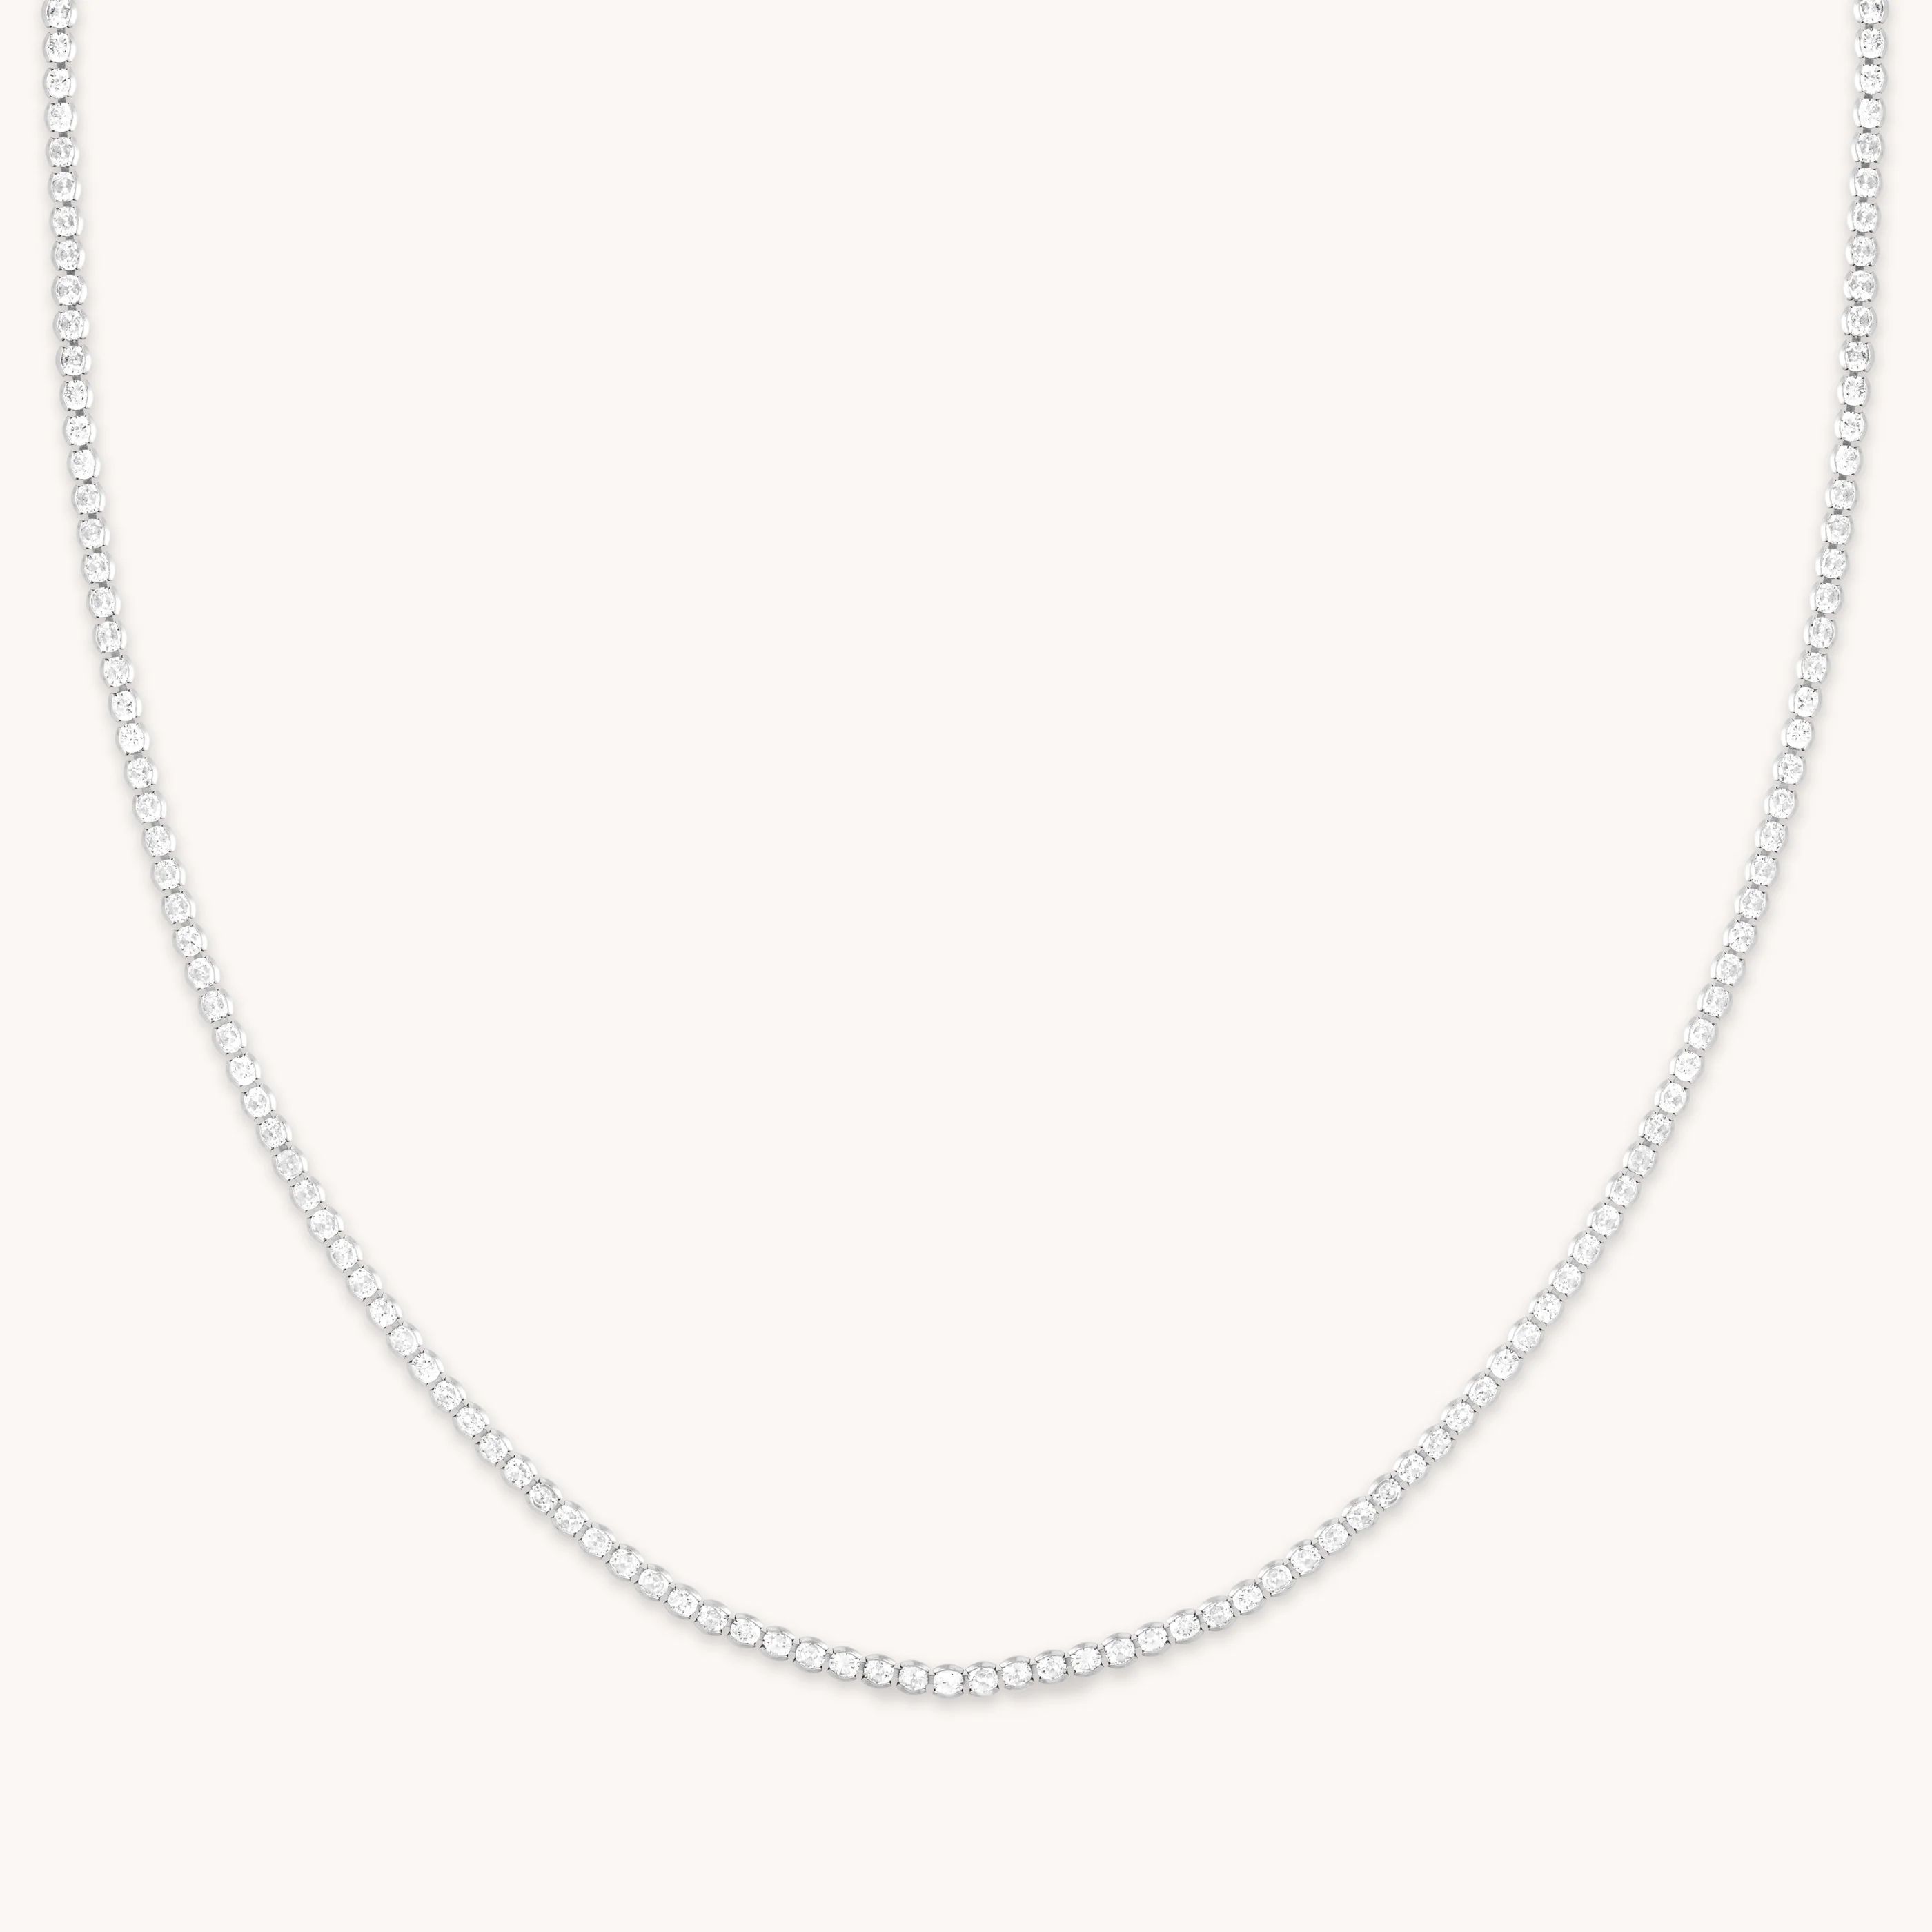 Gleam Tennis Chain Necklace in Silver | Astrid and Miyu